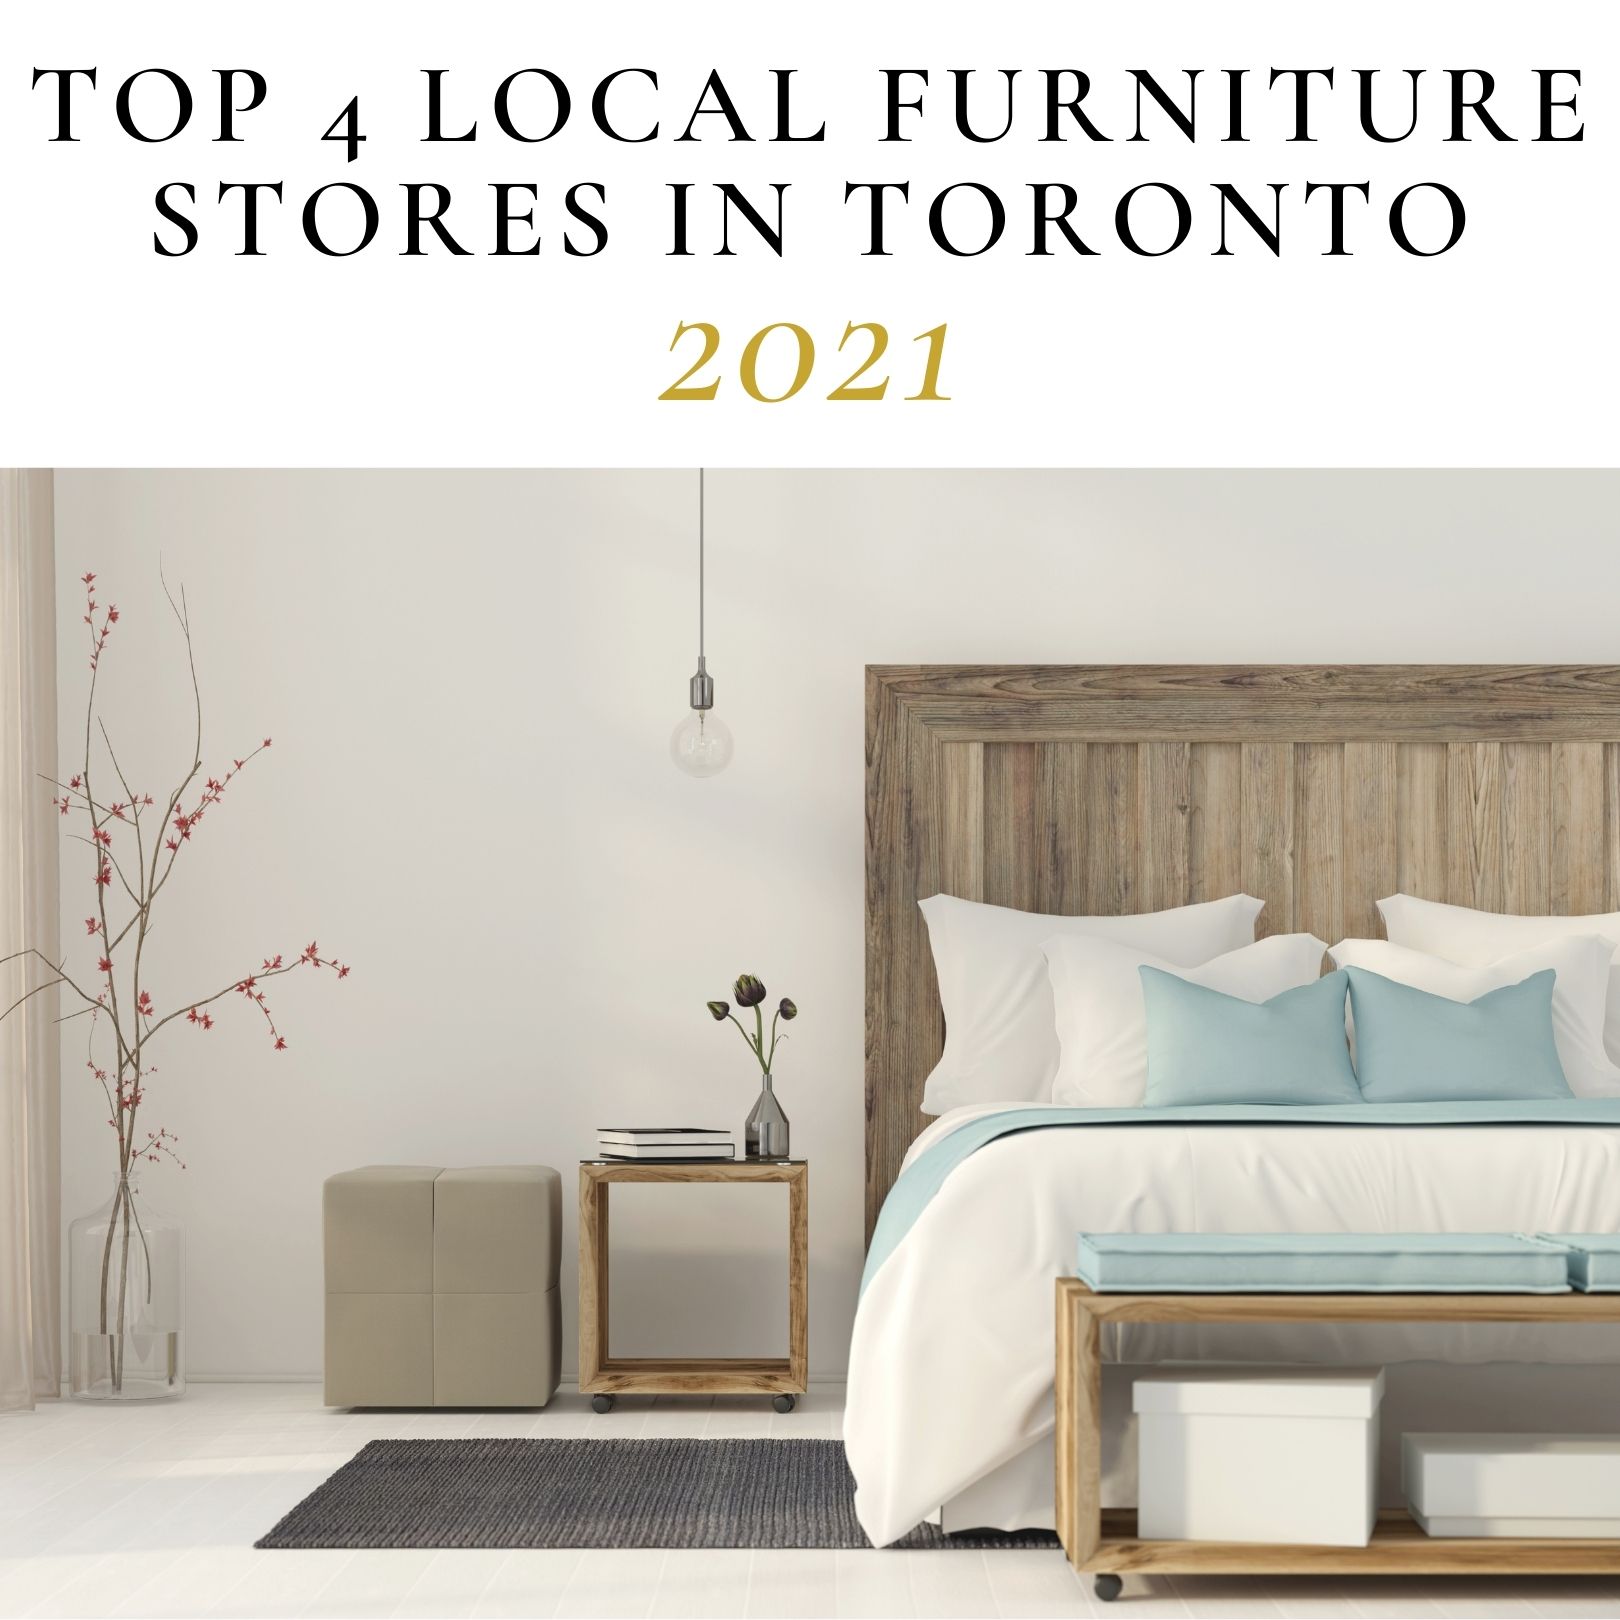 Top 4 local furniture stores in Toronto | 2021